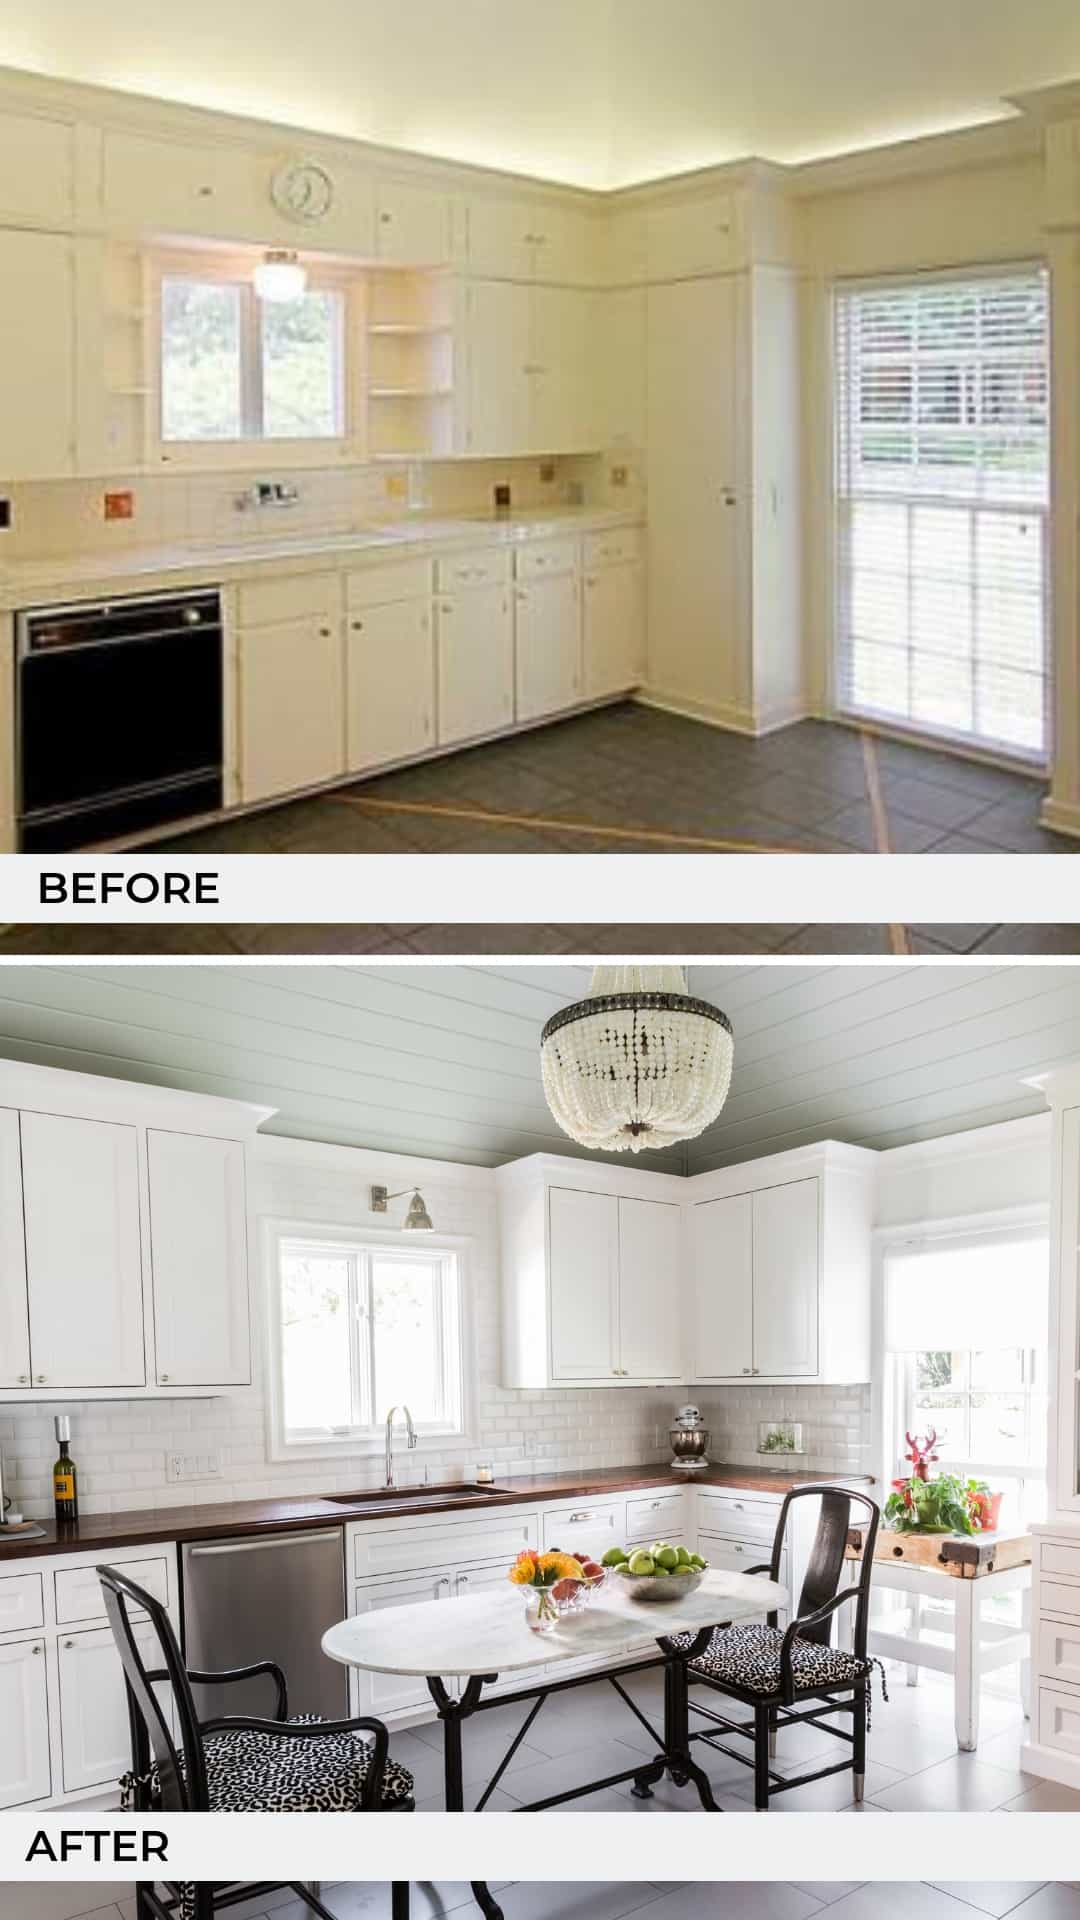 Laura Umansky's home on Dryden, the kitchen before and after